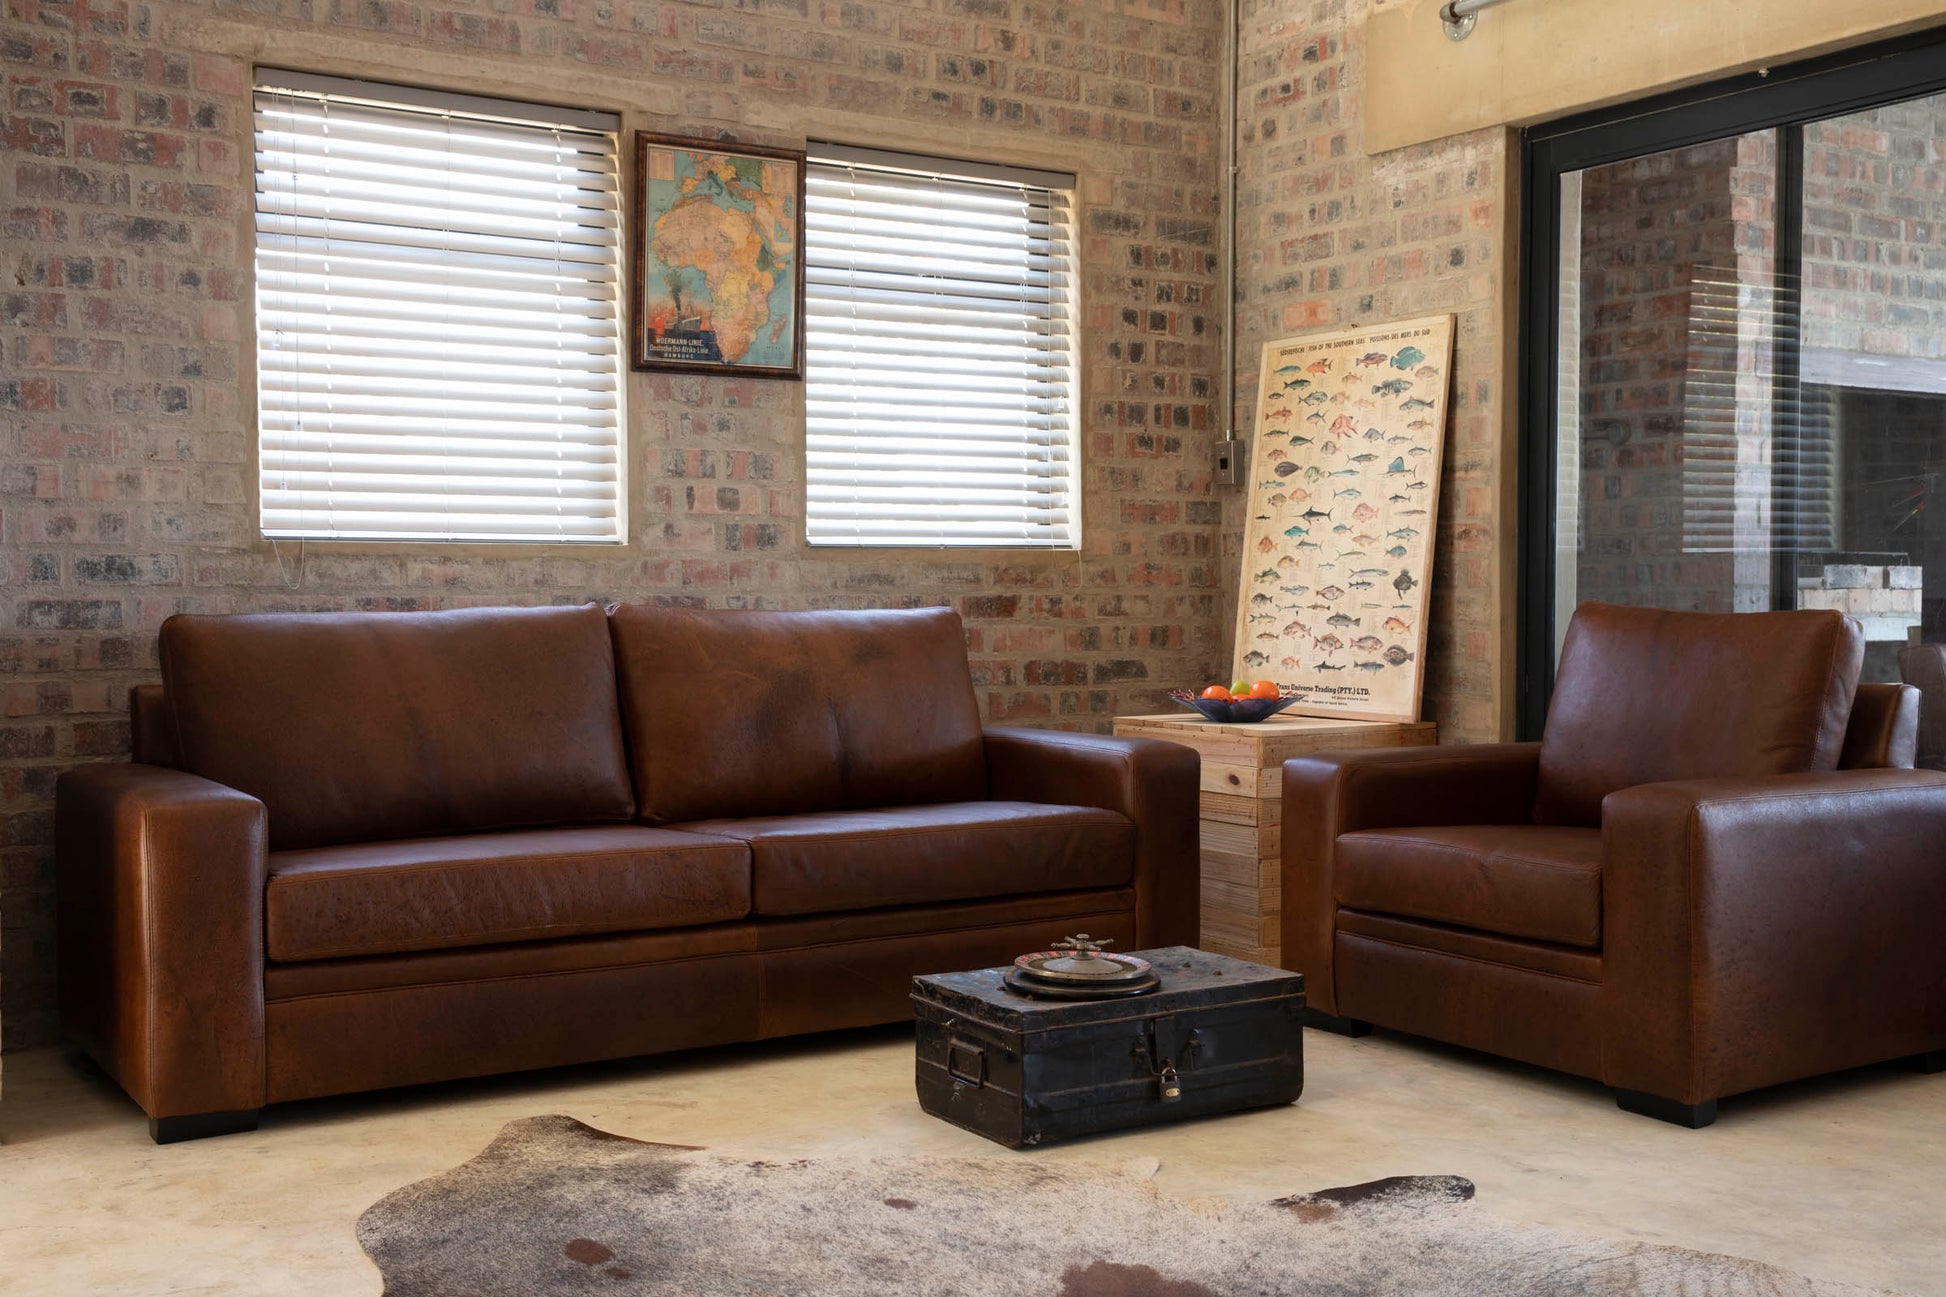 Manhattan Collection – Elevate your space with our versatile Manhattan design, available in Sofas, Daybeds, and Corner Units. Offering a relaxed feel with support in the seat and back, it's the perfect choice for various activities such as watching, listening, reading, or entertaining.  Customize your experience with any size you desire and a wide range of premium leathers and fabrics, capturing your own personal style. Each piece is custom manufactured for a truly unique addition to your living space.